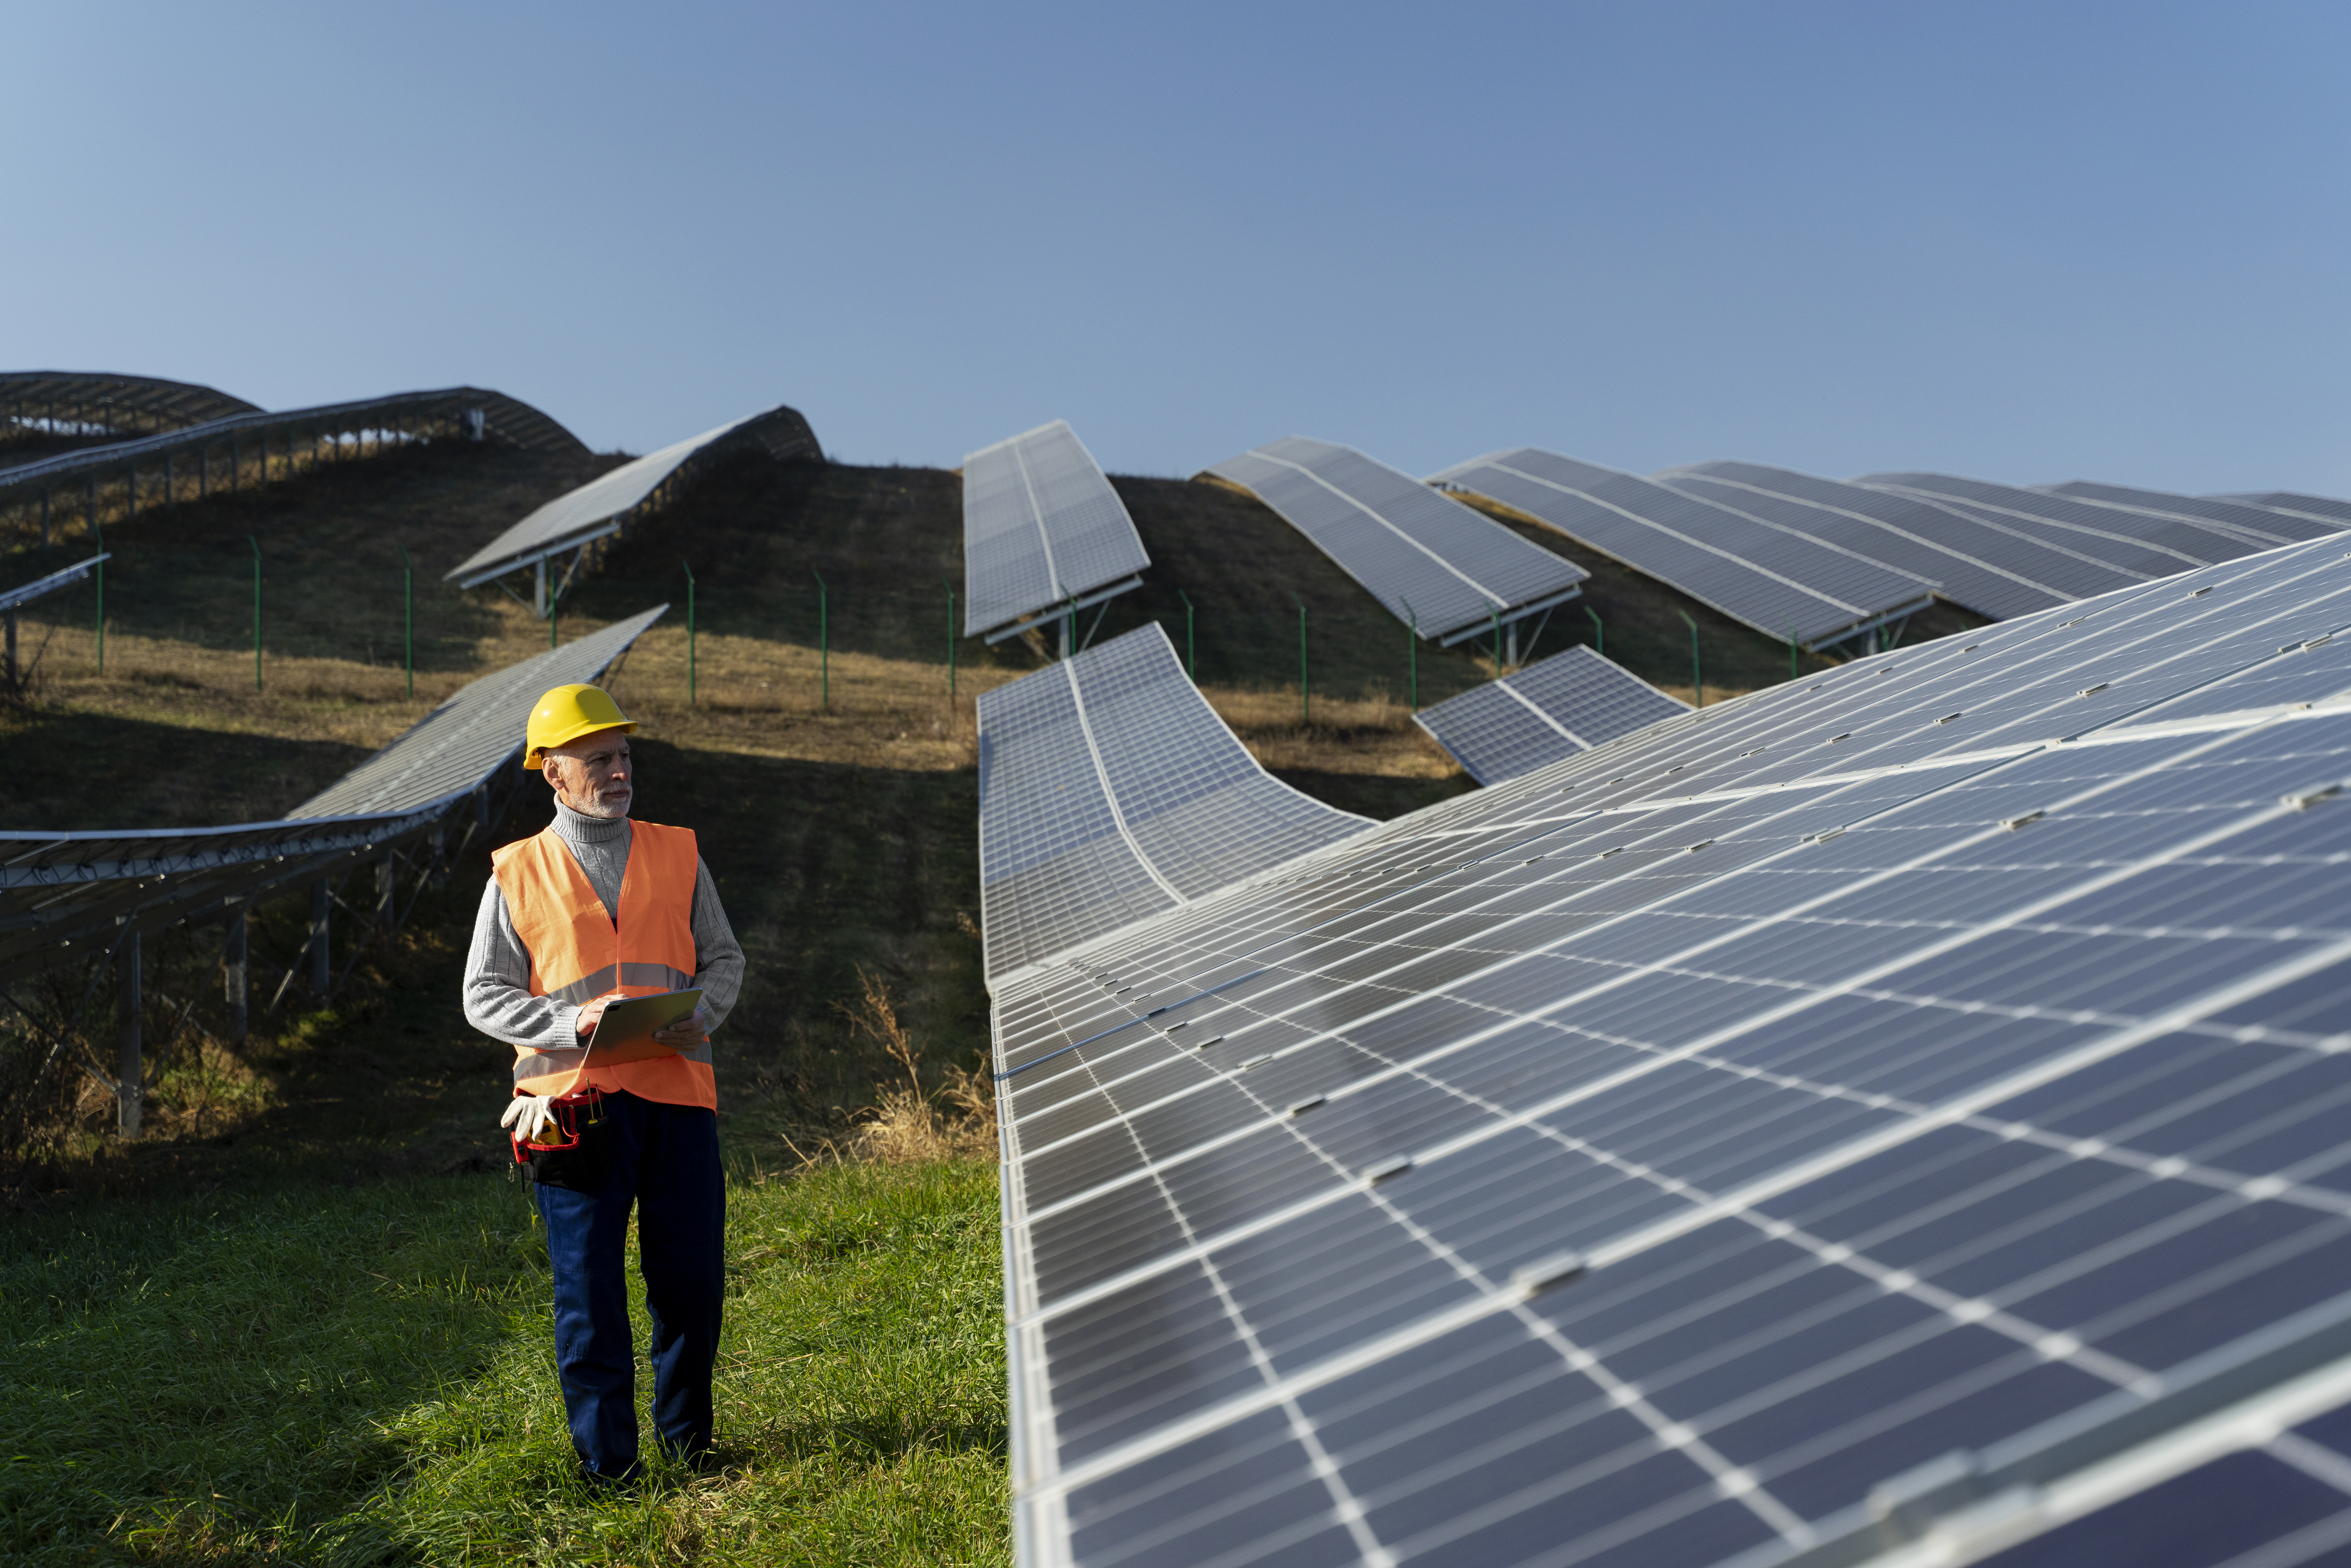 “The Next Generation of Solar Panels: What to Expect”